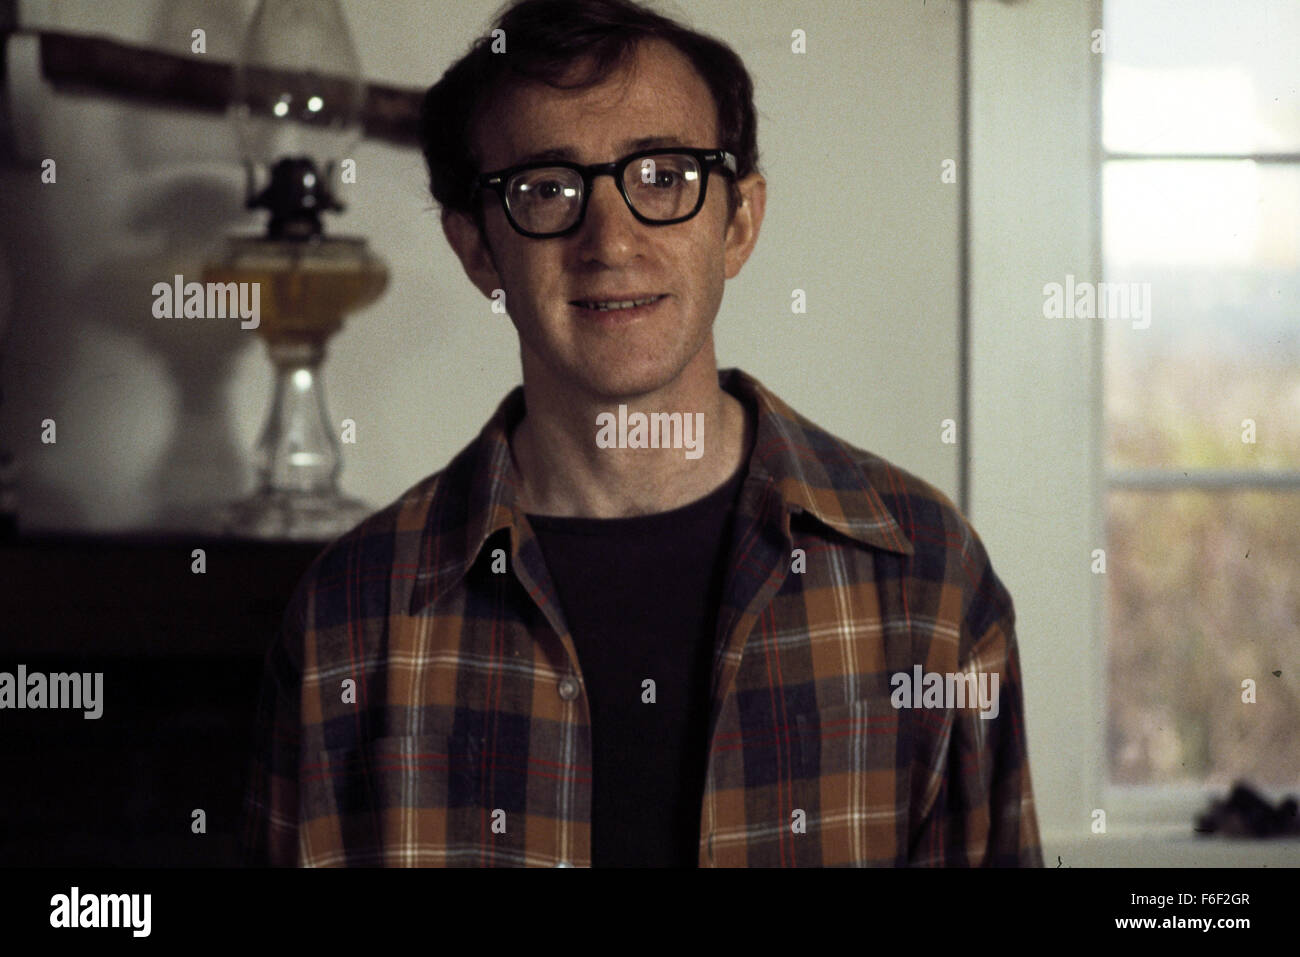 Film Title:  ANNIE HALL.  DIRECTOR:  Woody Allen.  STUDIO: UNITED ARTISTS  PLOT:    After breaking up with his girlfriend Annie Hall (Diane Keaton), neurotic comedian Alvy Singer (Woody Allen) goes on a stream of conciousness journey through his memories of their relationship, trying to find out what caused them to part ways. The film features innovative elements including cartoon segments, flashbacks, and even breaking the 'fourth wall' by having characters address the camera.  The  film marks the fourth pairing of Keaton and Allen, who were also an off-screen couple at the time.  Winner of 4 Stock Photo